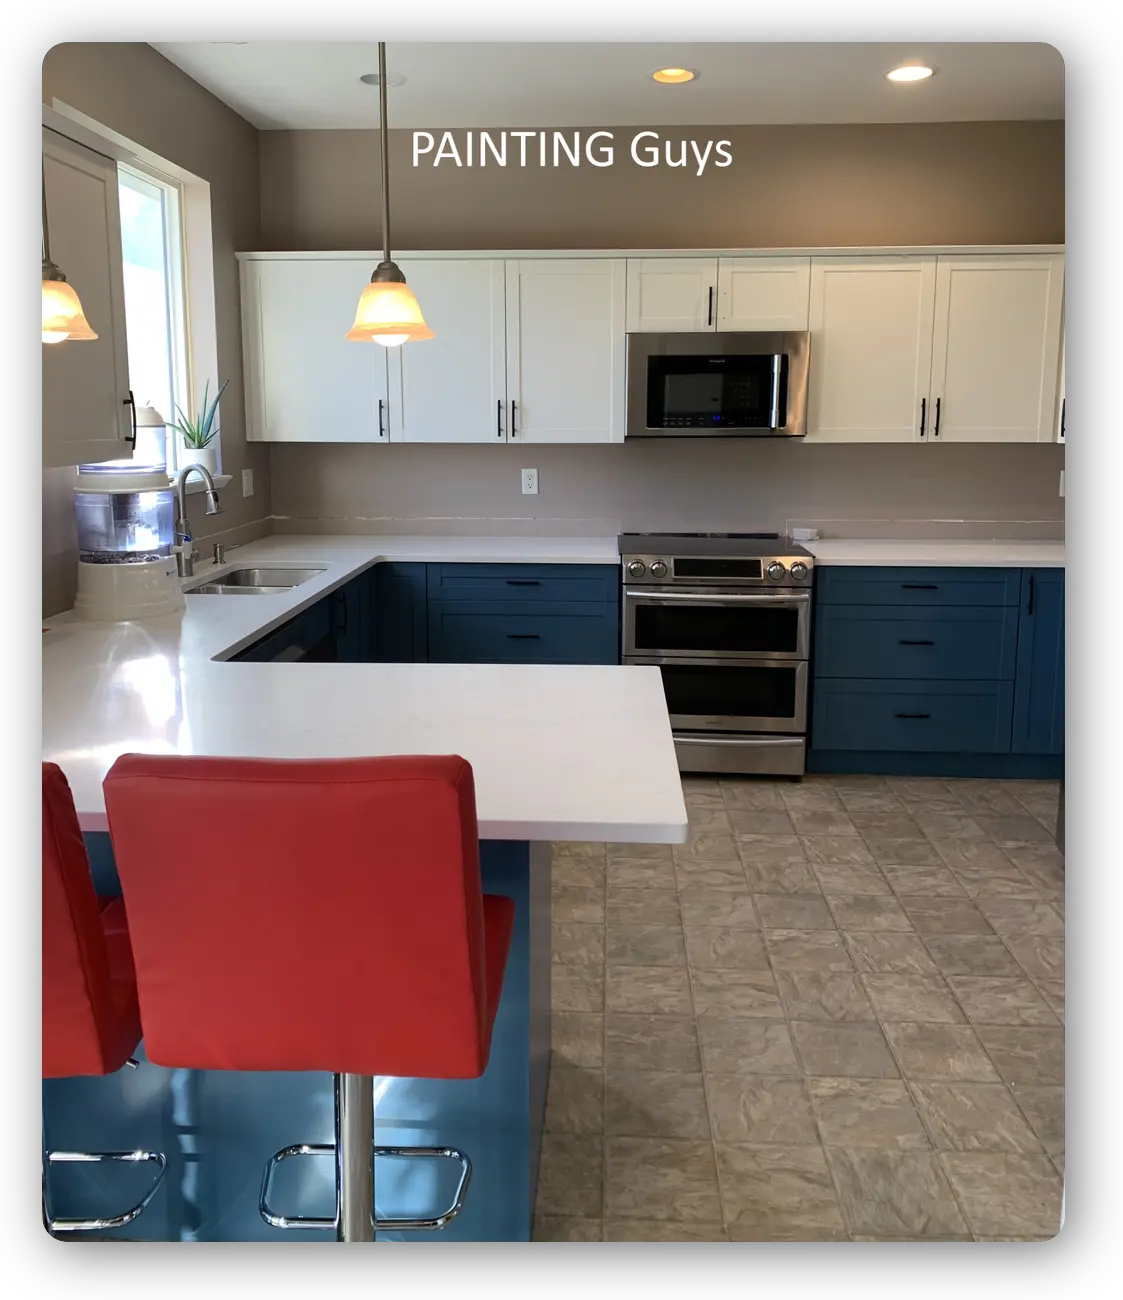 Painting Laminated Cabinets - Kitchen Cabinet Painting